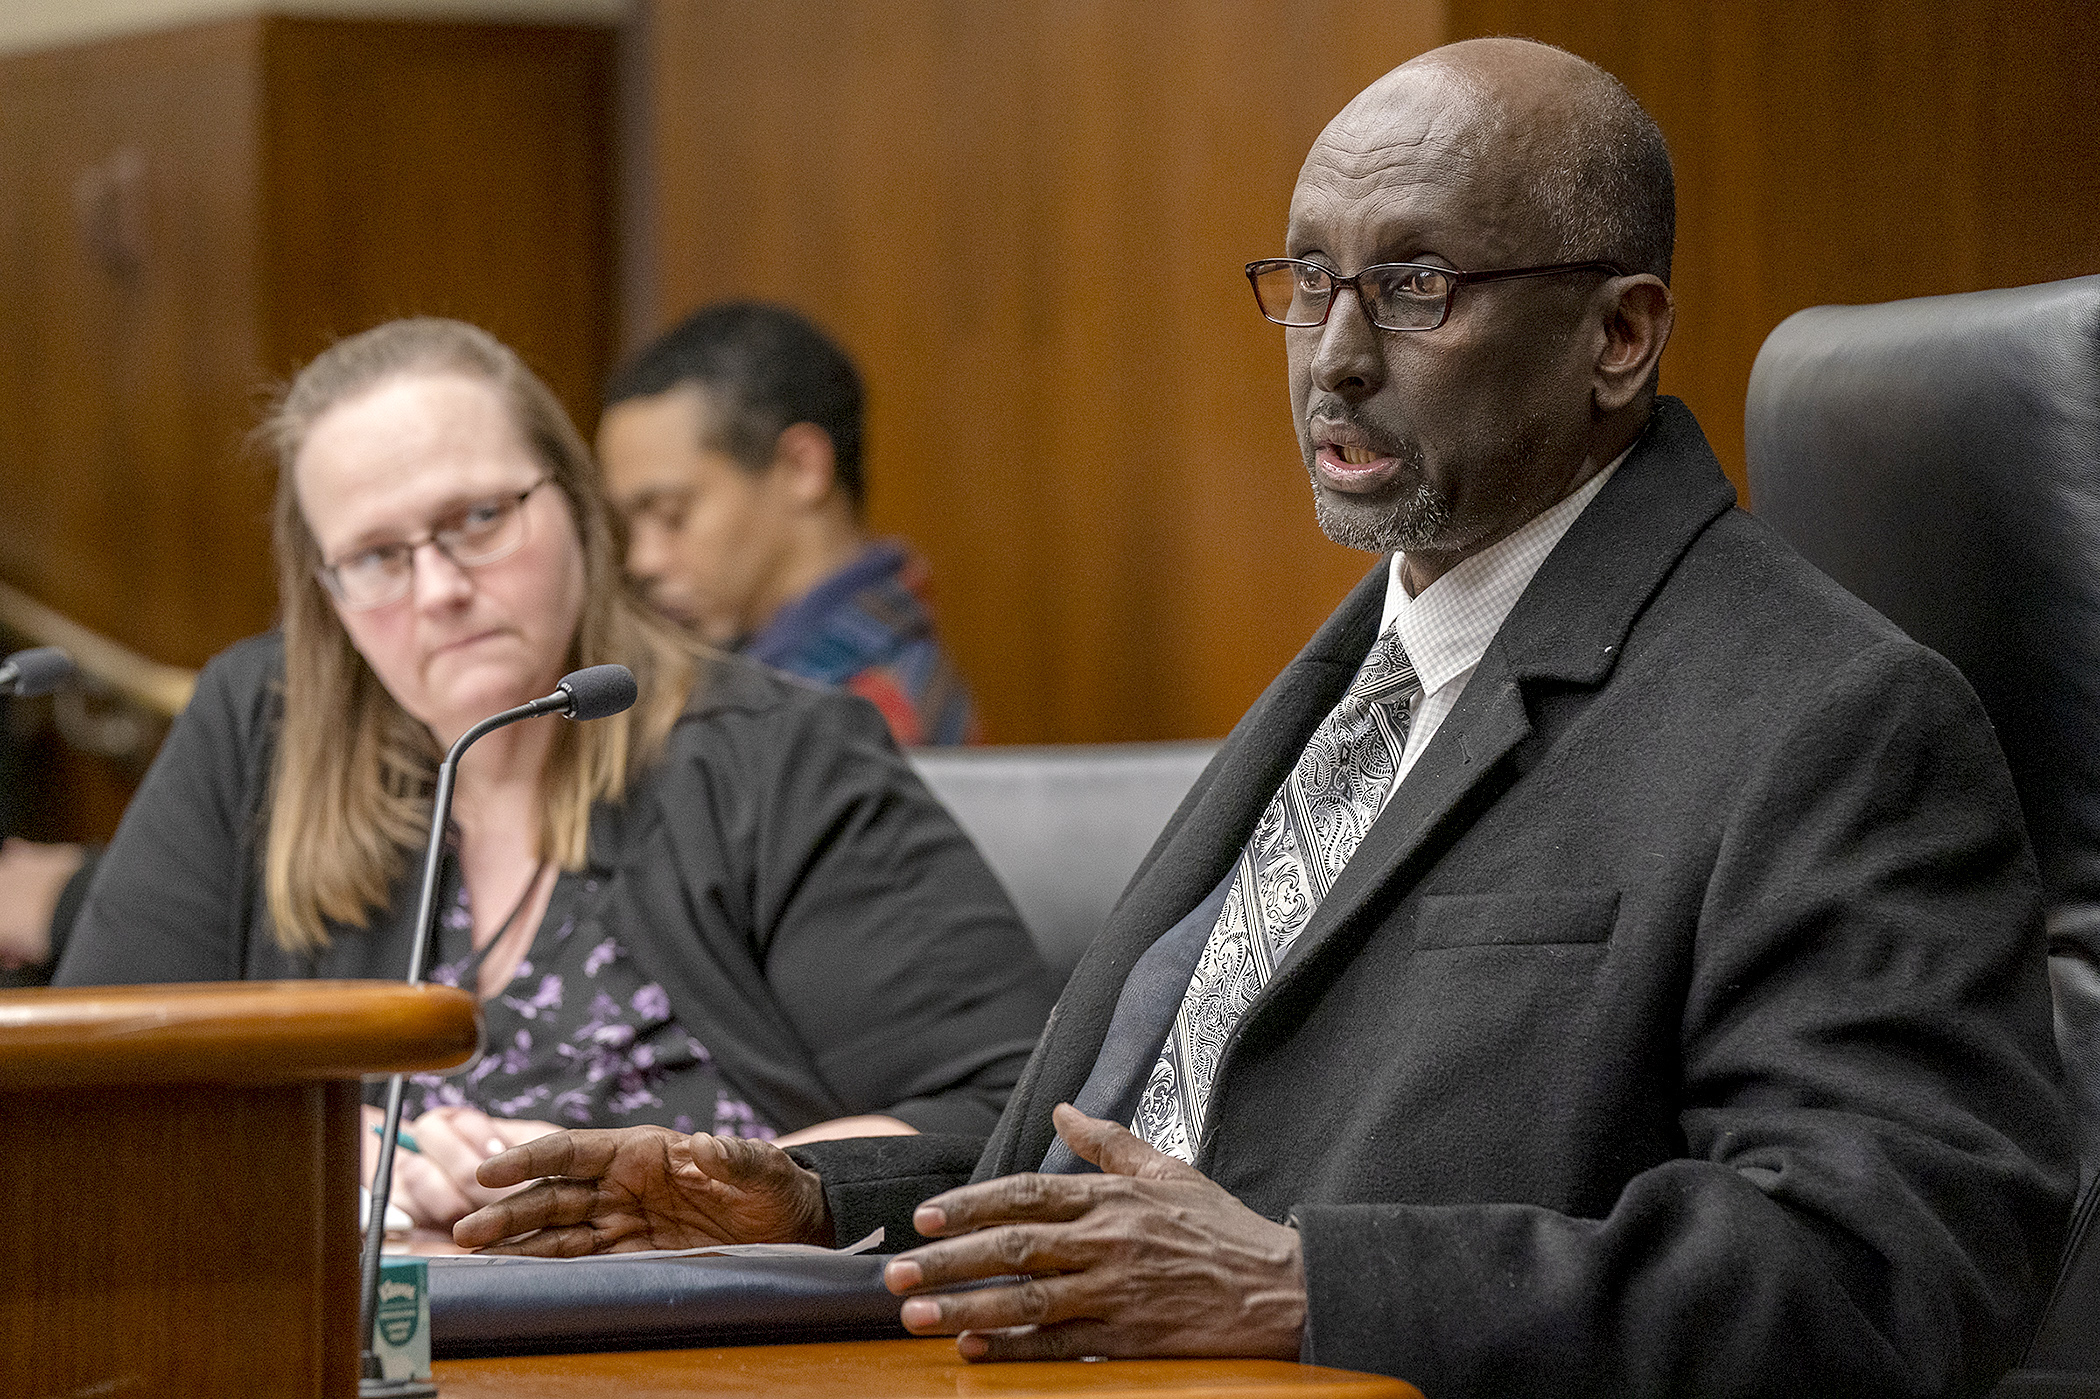 Omar Nur, executive director of the Somali American Social Service Association, testifies before the House Human Services Policy Committee regarding HF3098. The bill is sponsored by Rep. Kim Hicks, left. (Photo by Michele Jokinen)